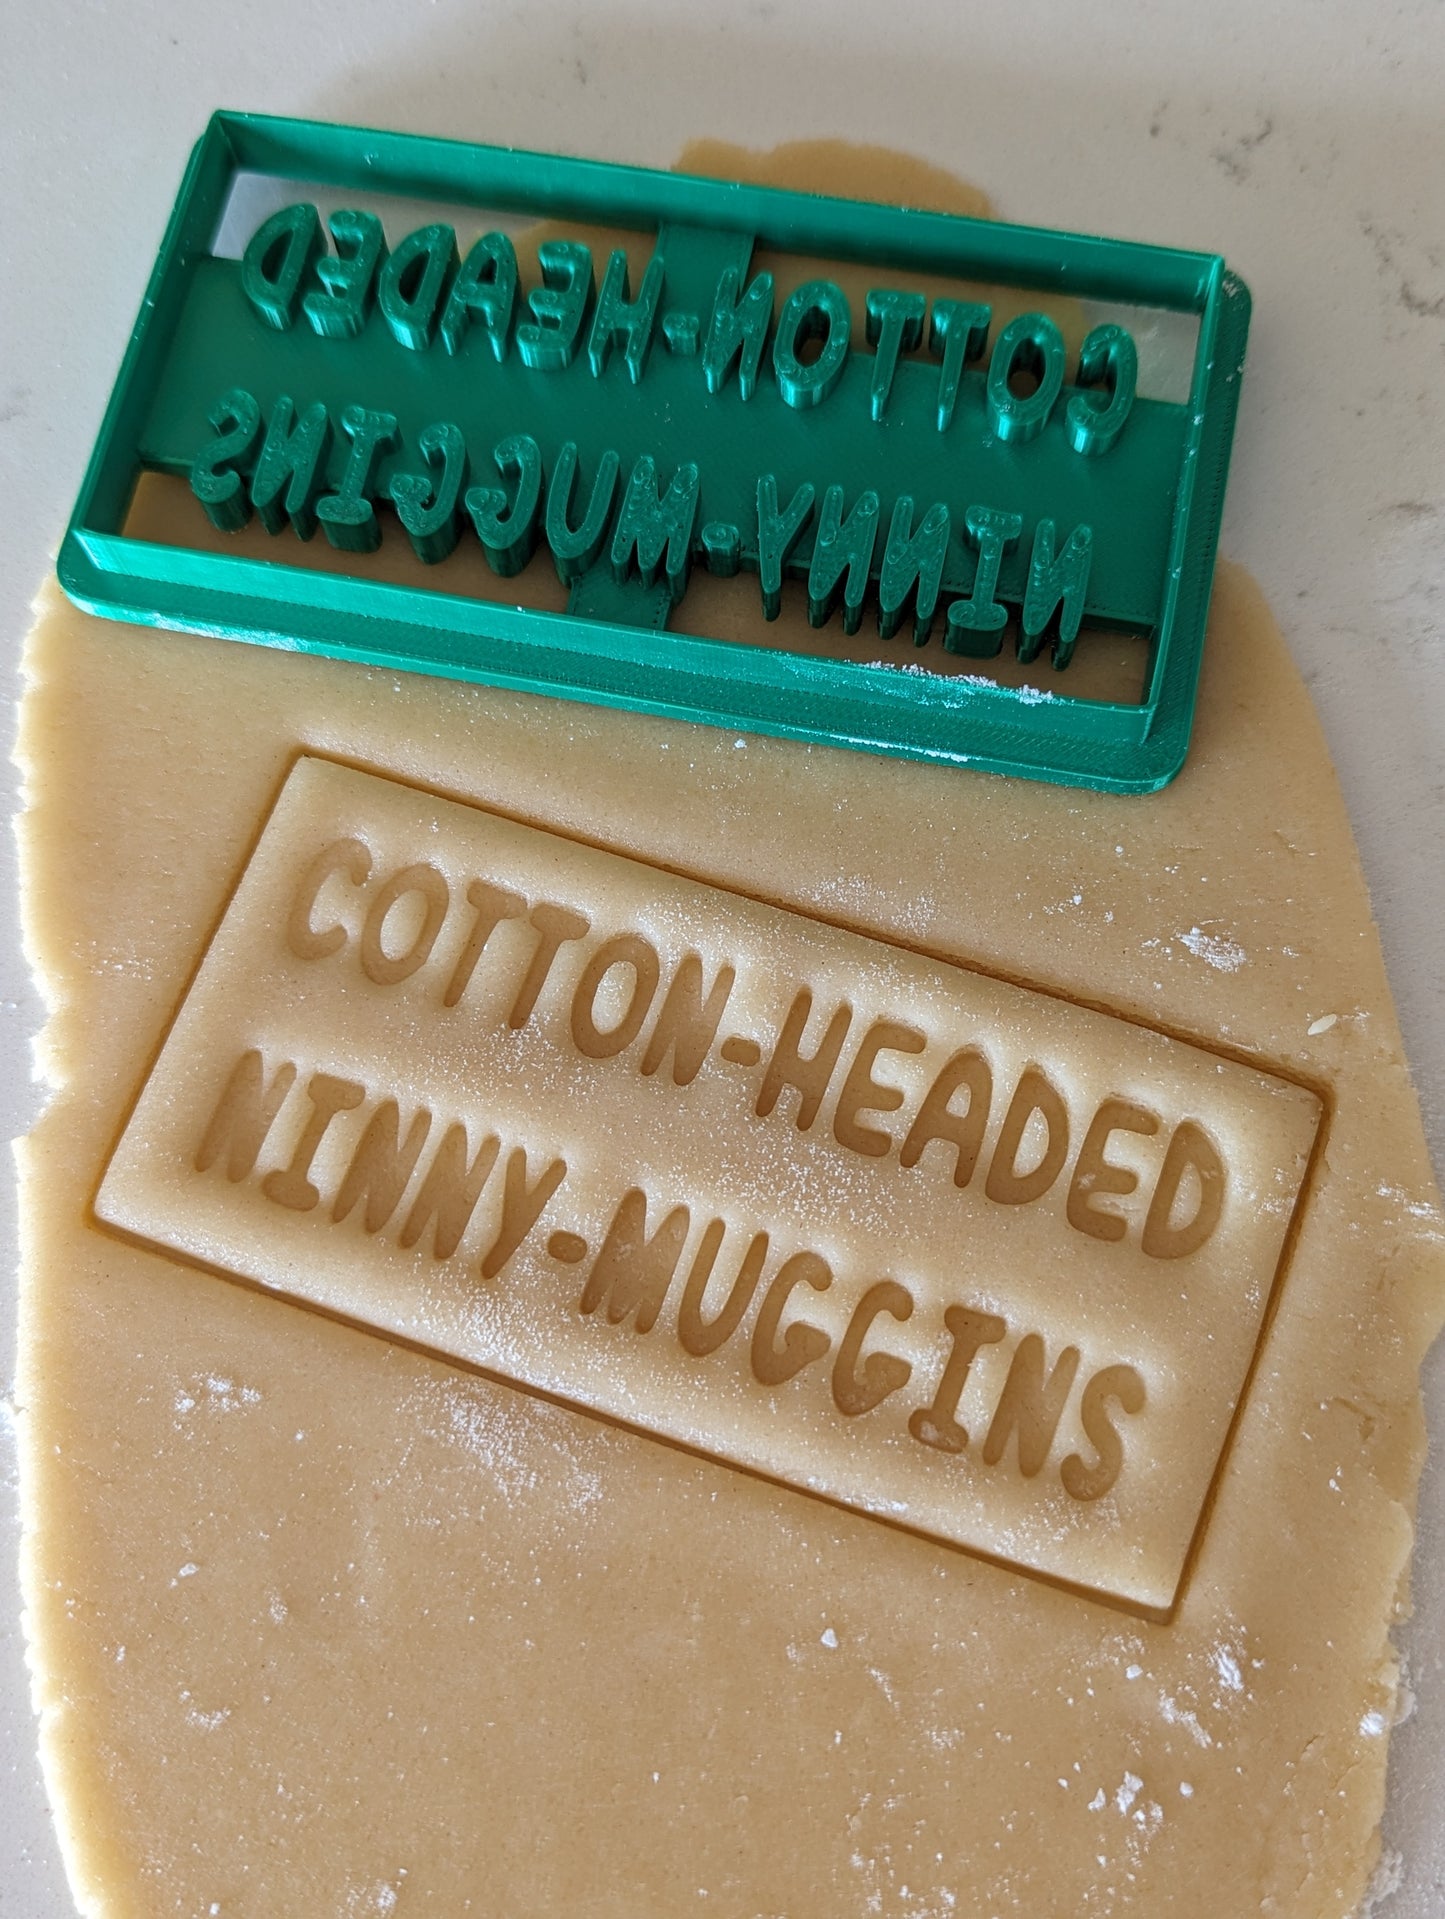 Cotton-Headed Ninny Muggins Cookie Cutter